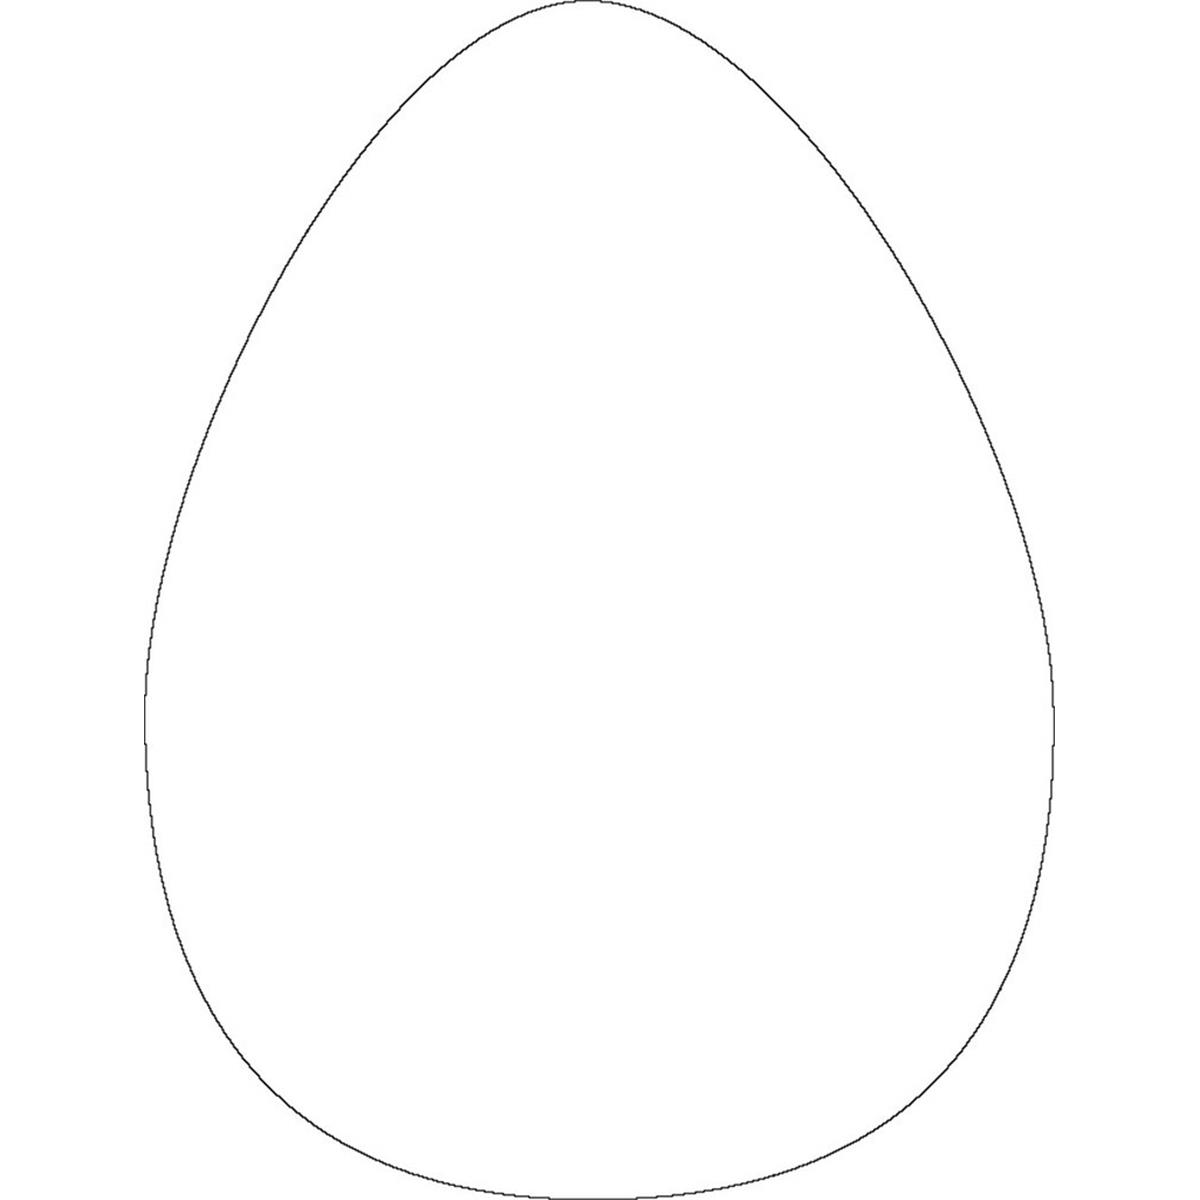 Se-0945 4.5 X 4 In. Small Single Color Sticky Shape Notepad, Egg - 50 Sheets Per Pack